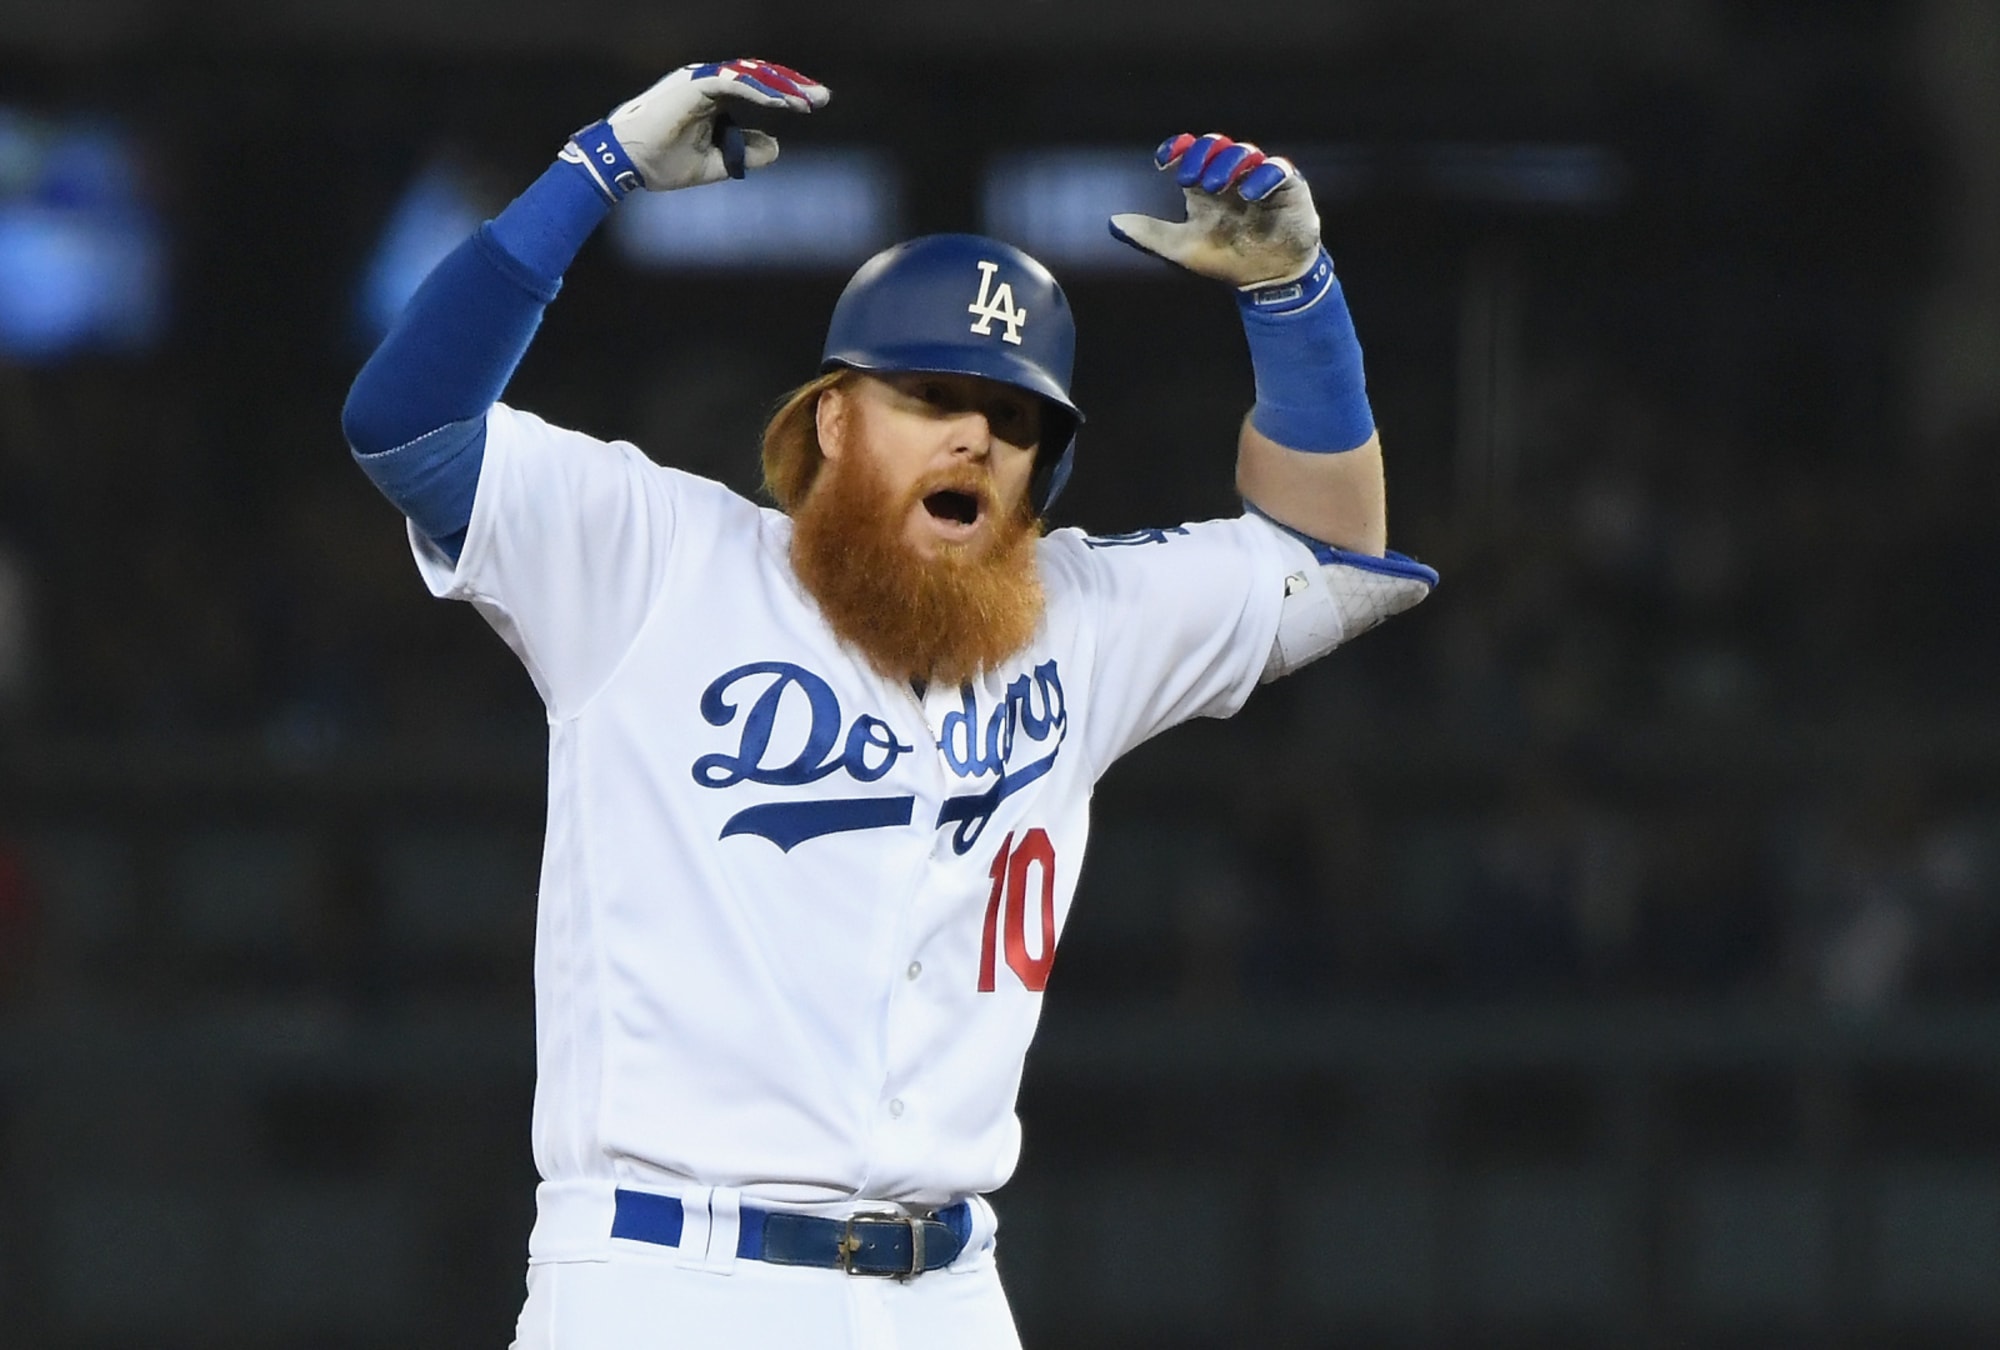 mlb wallpapers on X: justin turner los angeles dodgers #10 https